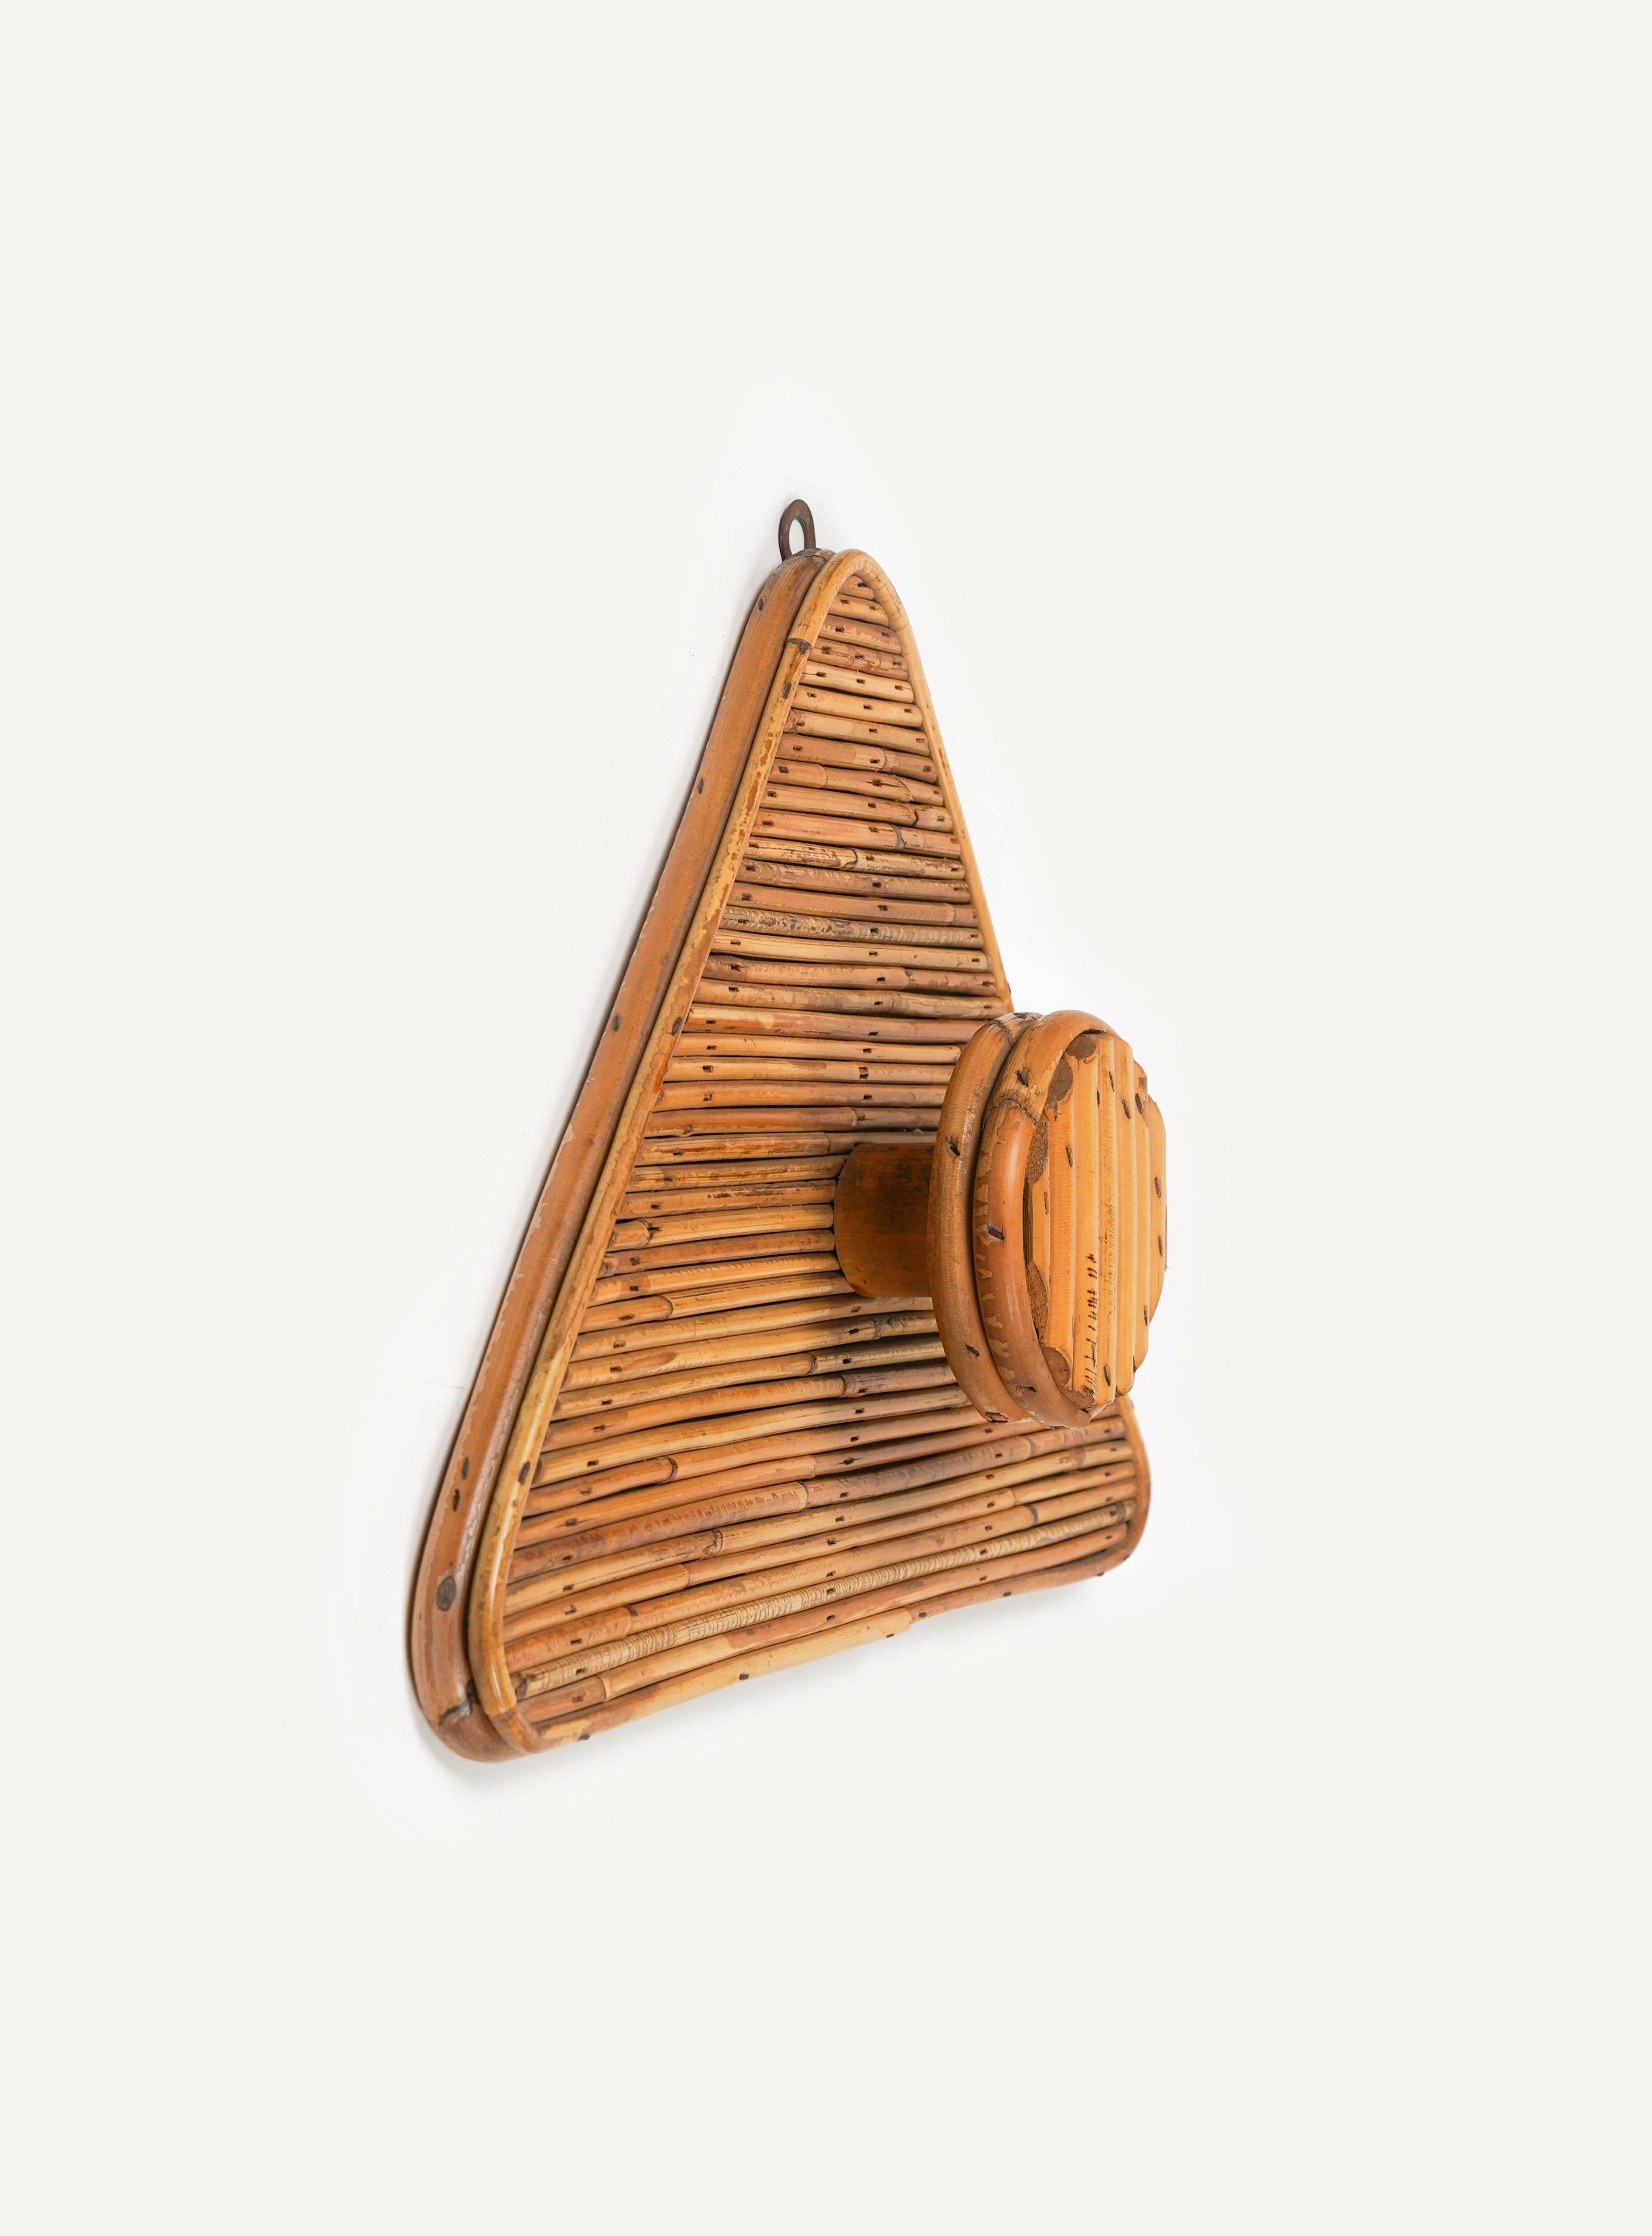 Italian Bamboo and Rattan Triangular Coat Rack Stand Vivai Del Sud Style, Italy 1960s For Sale